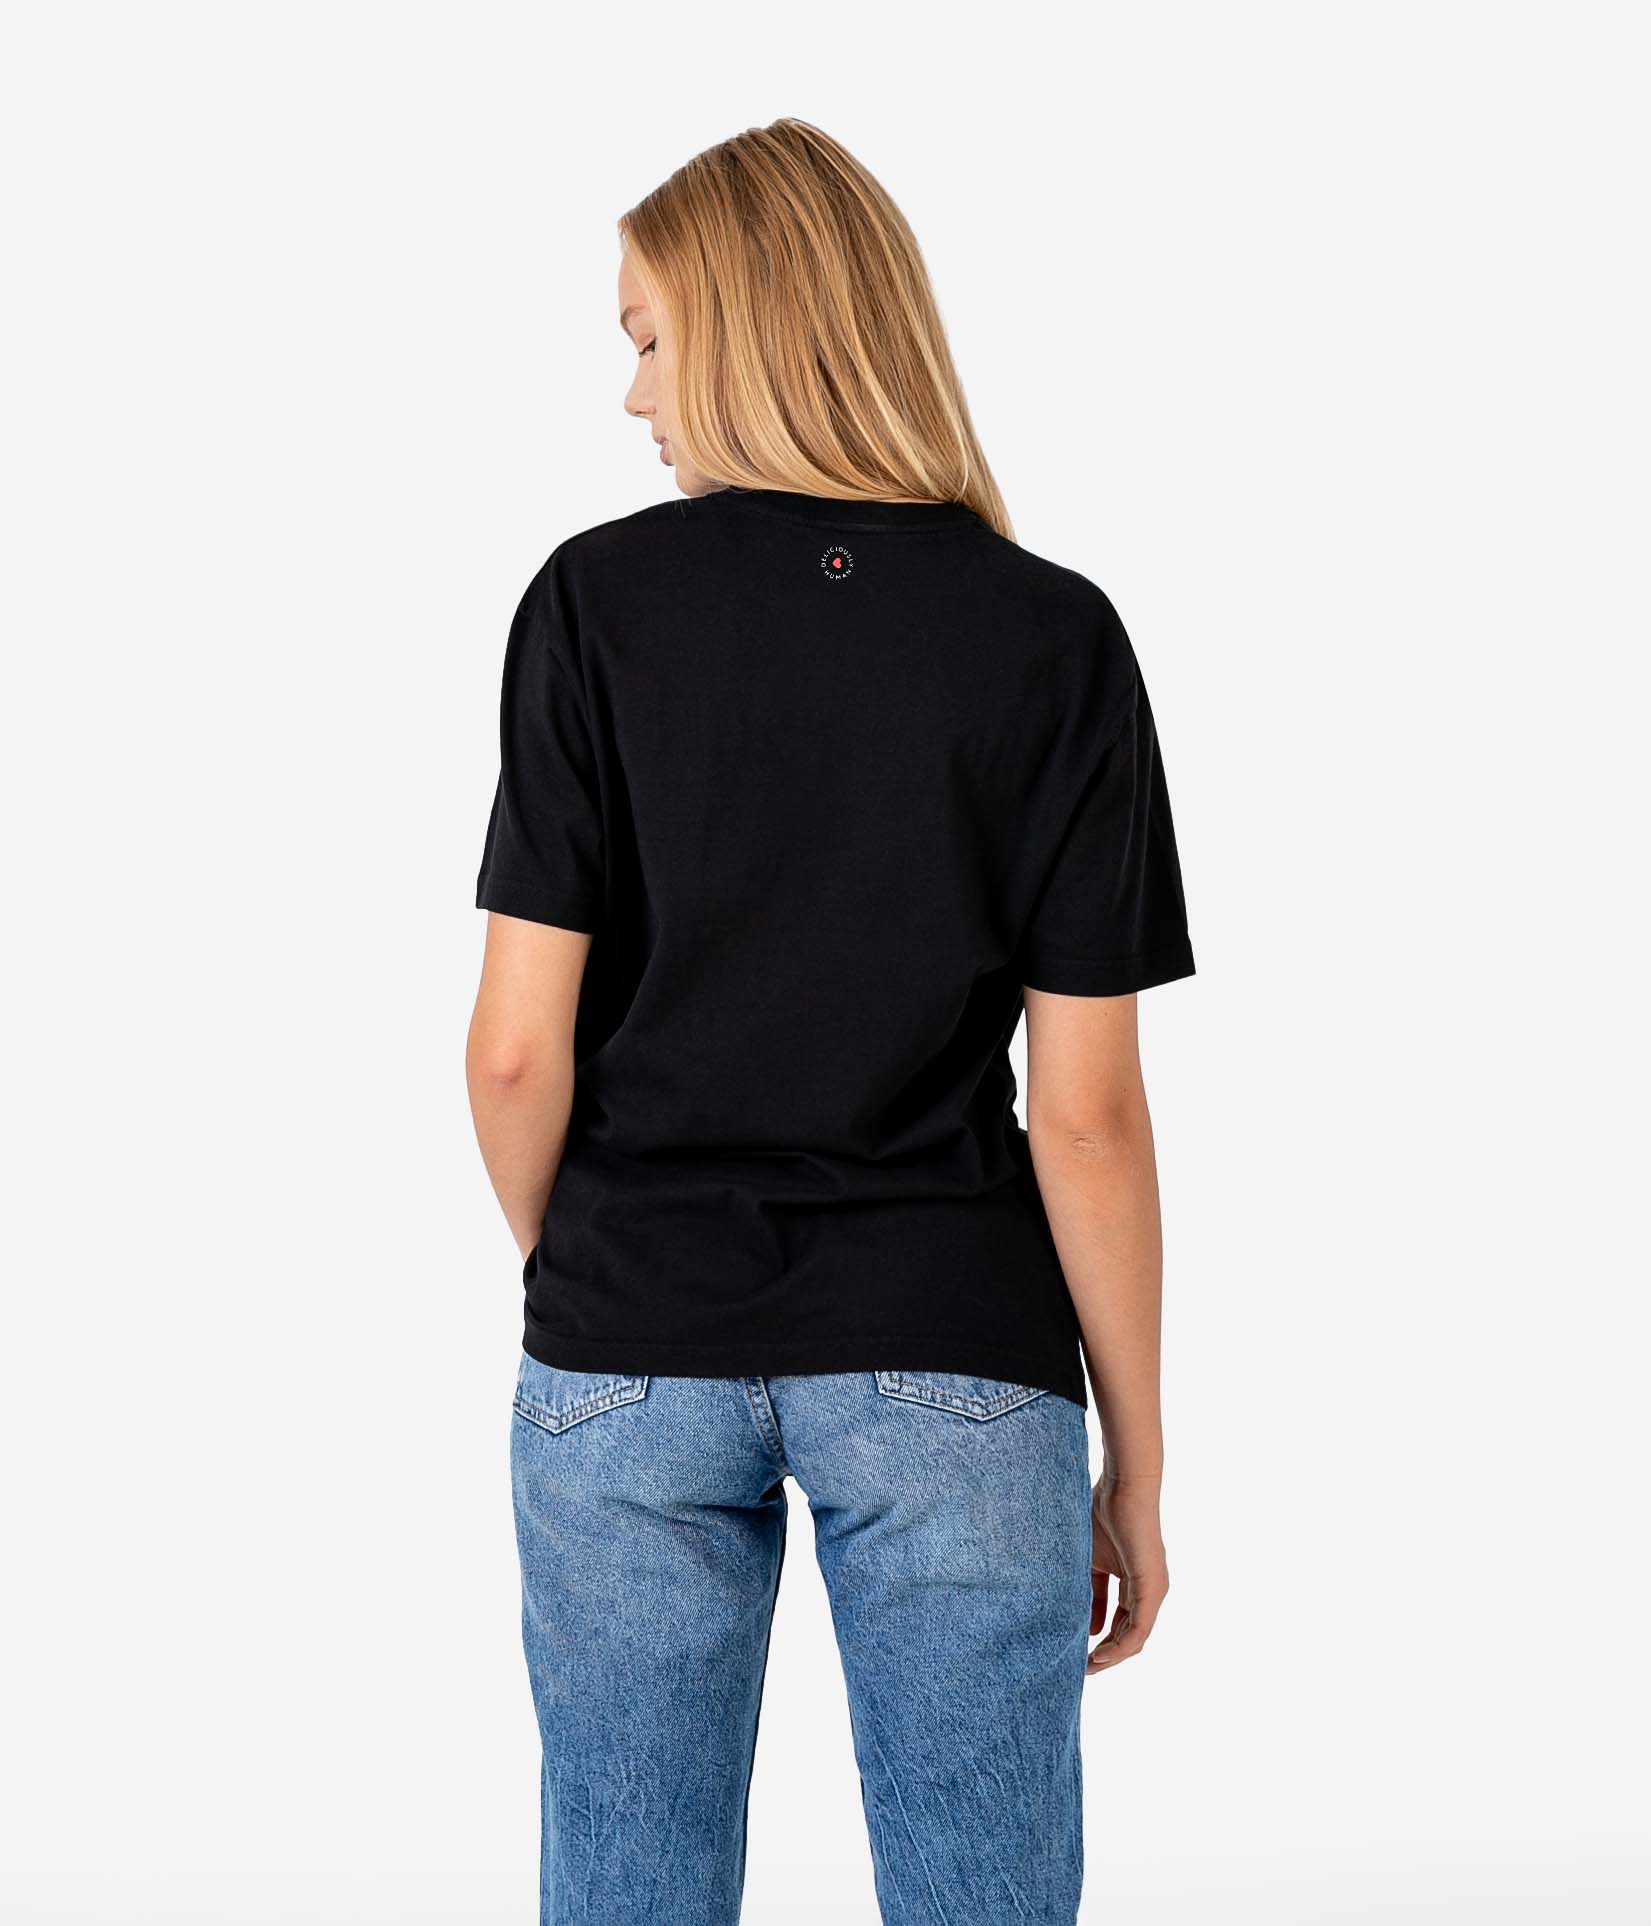 THE GRAPHIC T-SHIRT — PLANET BLACK